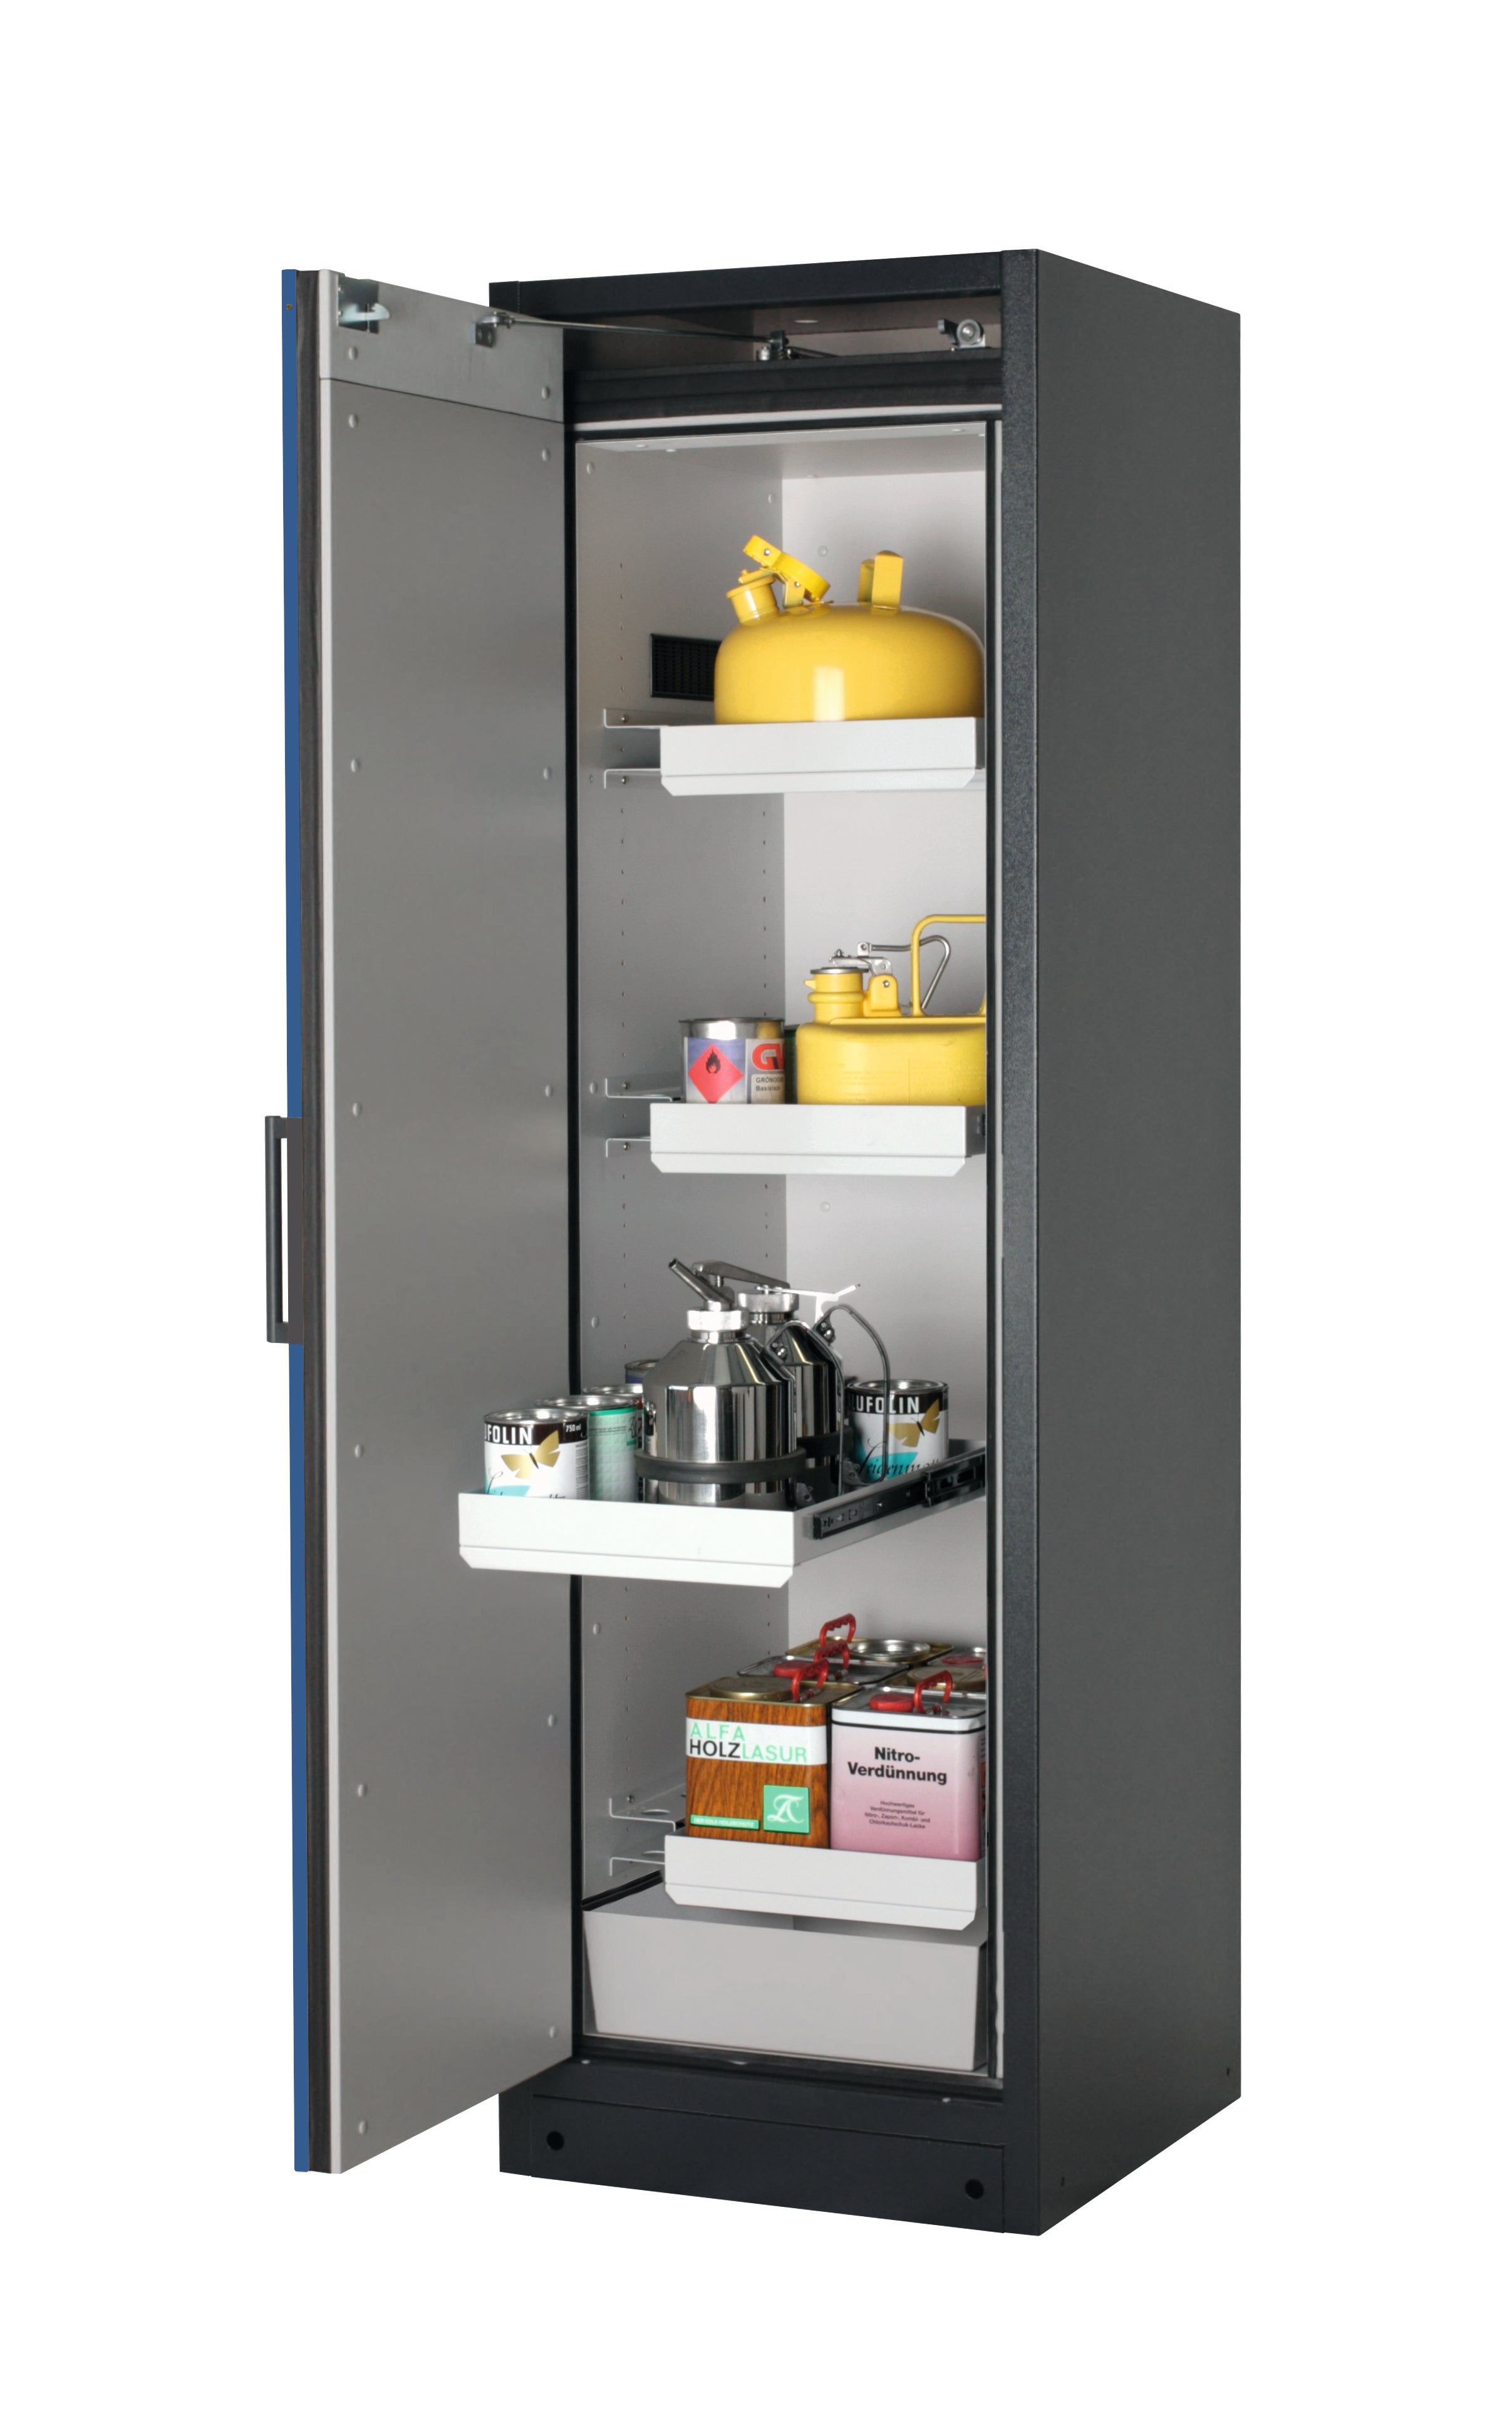 Type 90 safety storage cabinet Q-CLASSIC-90 model Q90.195.060 in gentian blue RAL 5010 with 3x drawer (standard) (sheet steel),